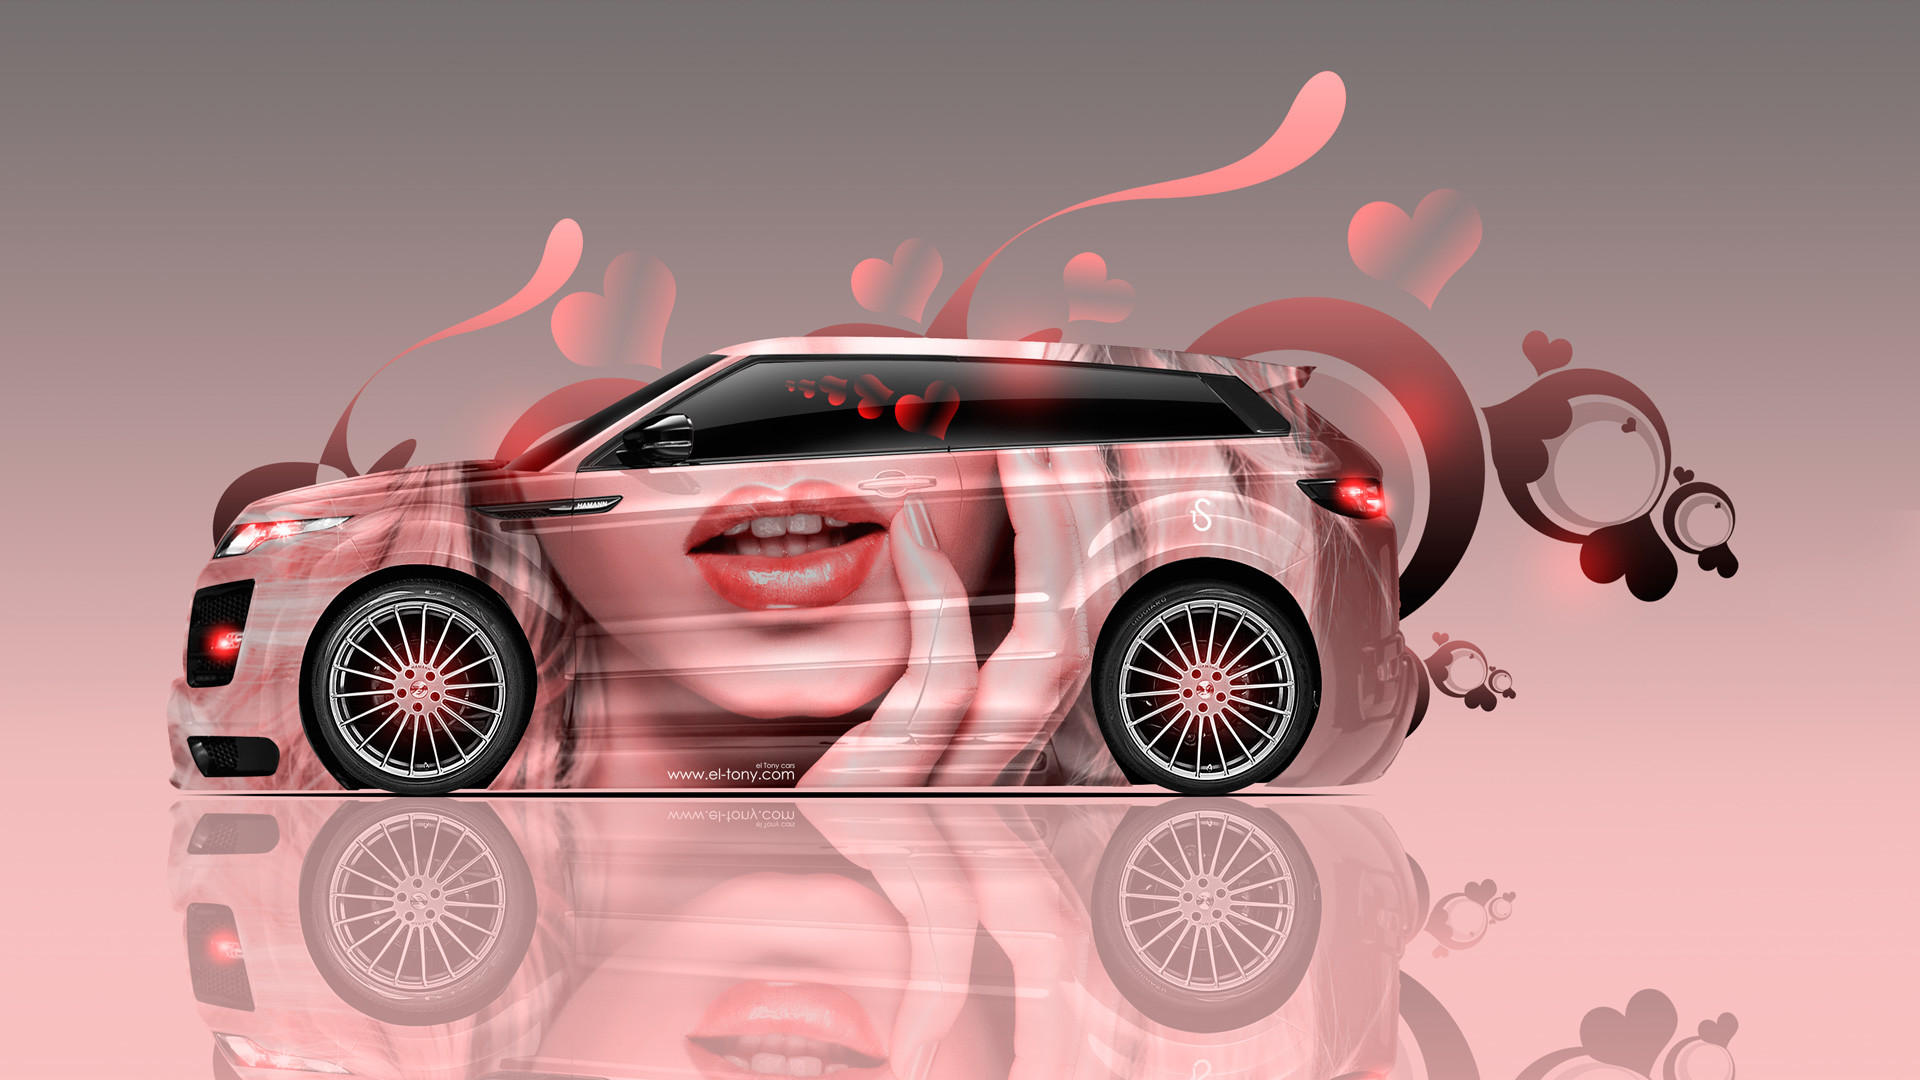 1920x1080 ... Land-Rover-Evoque-Side-Glamour-Girl-Lips-Aerography- ...